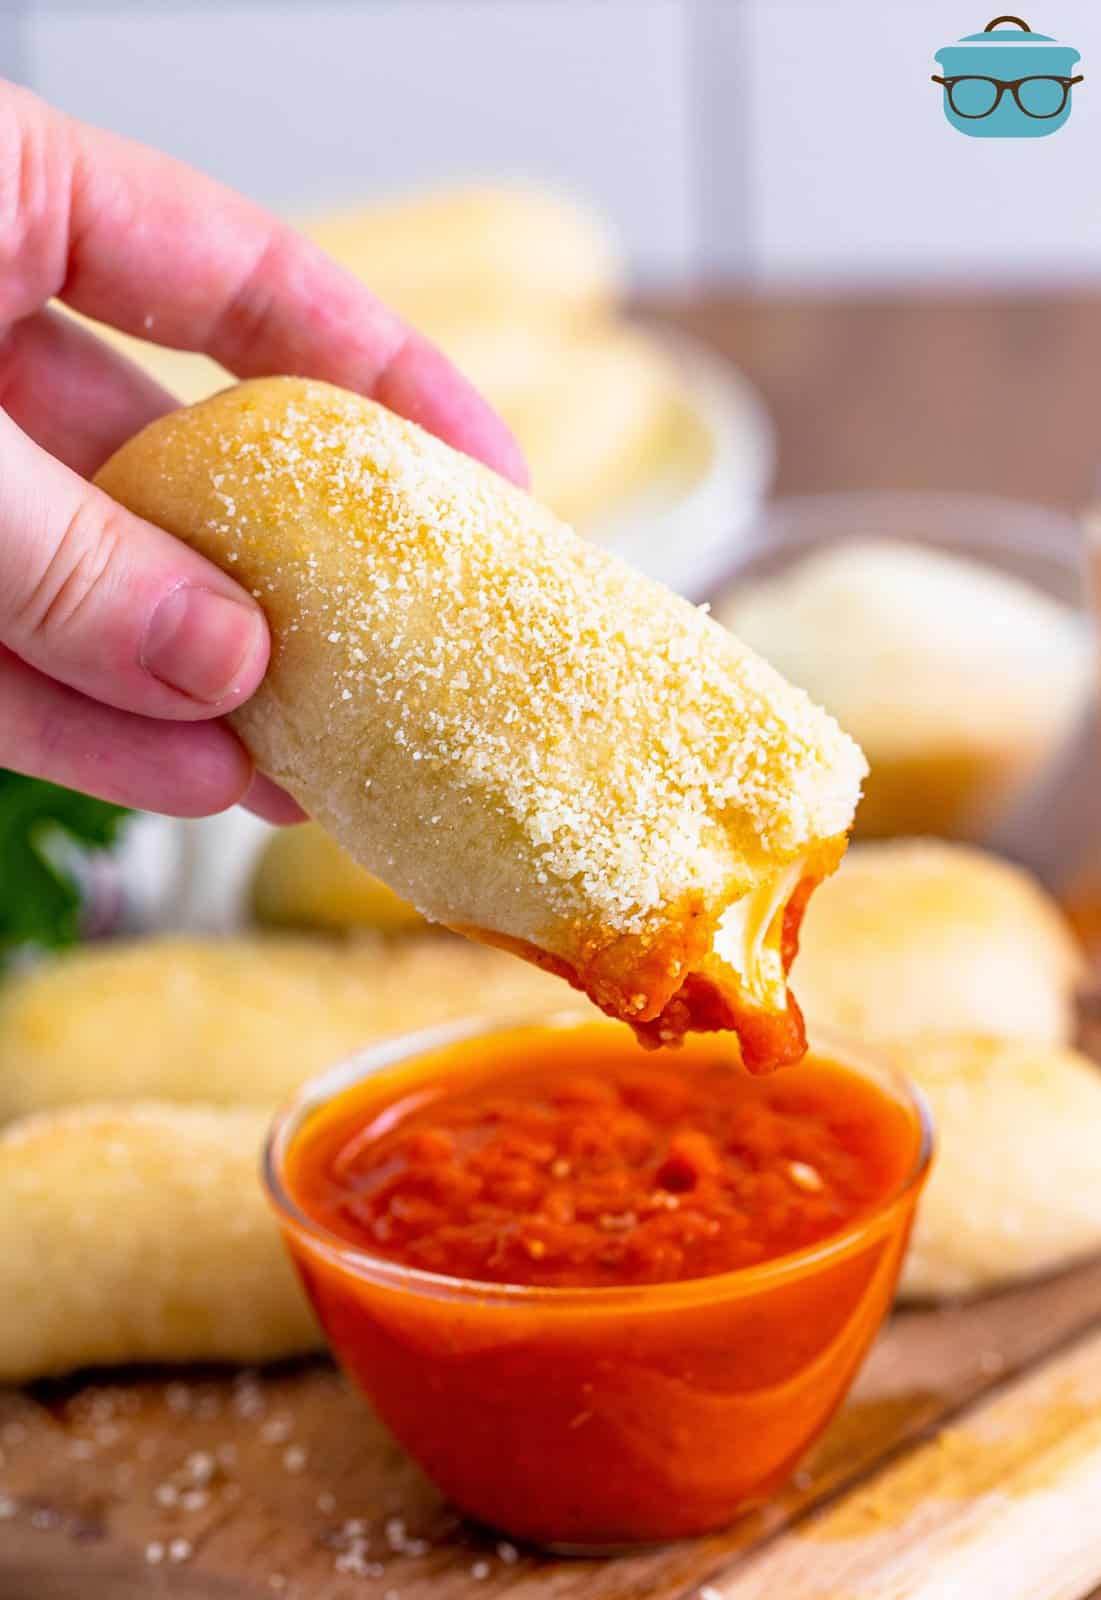 Fingers holding a Bosco stick after it was dipped in marinara sauce.